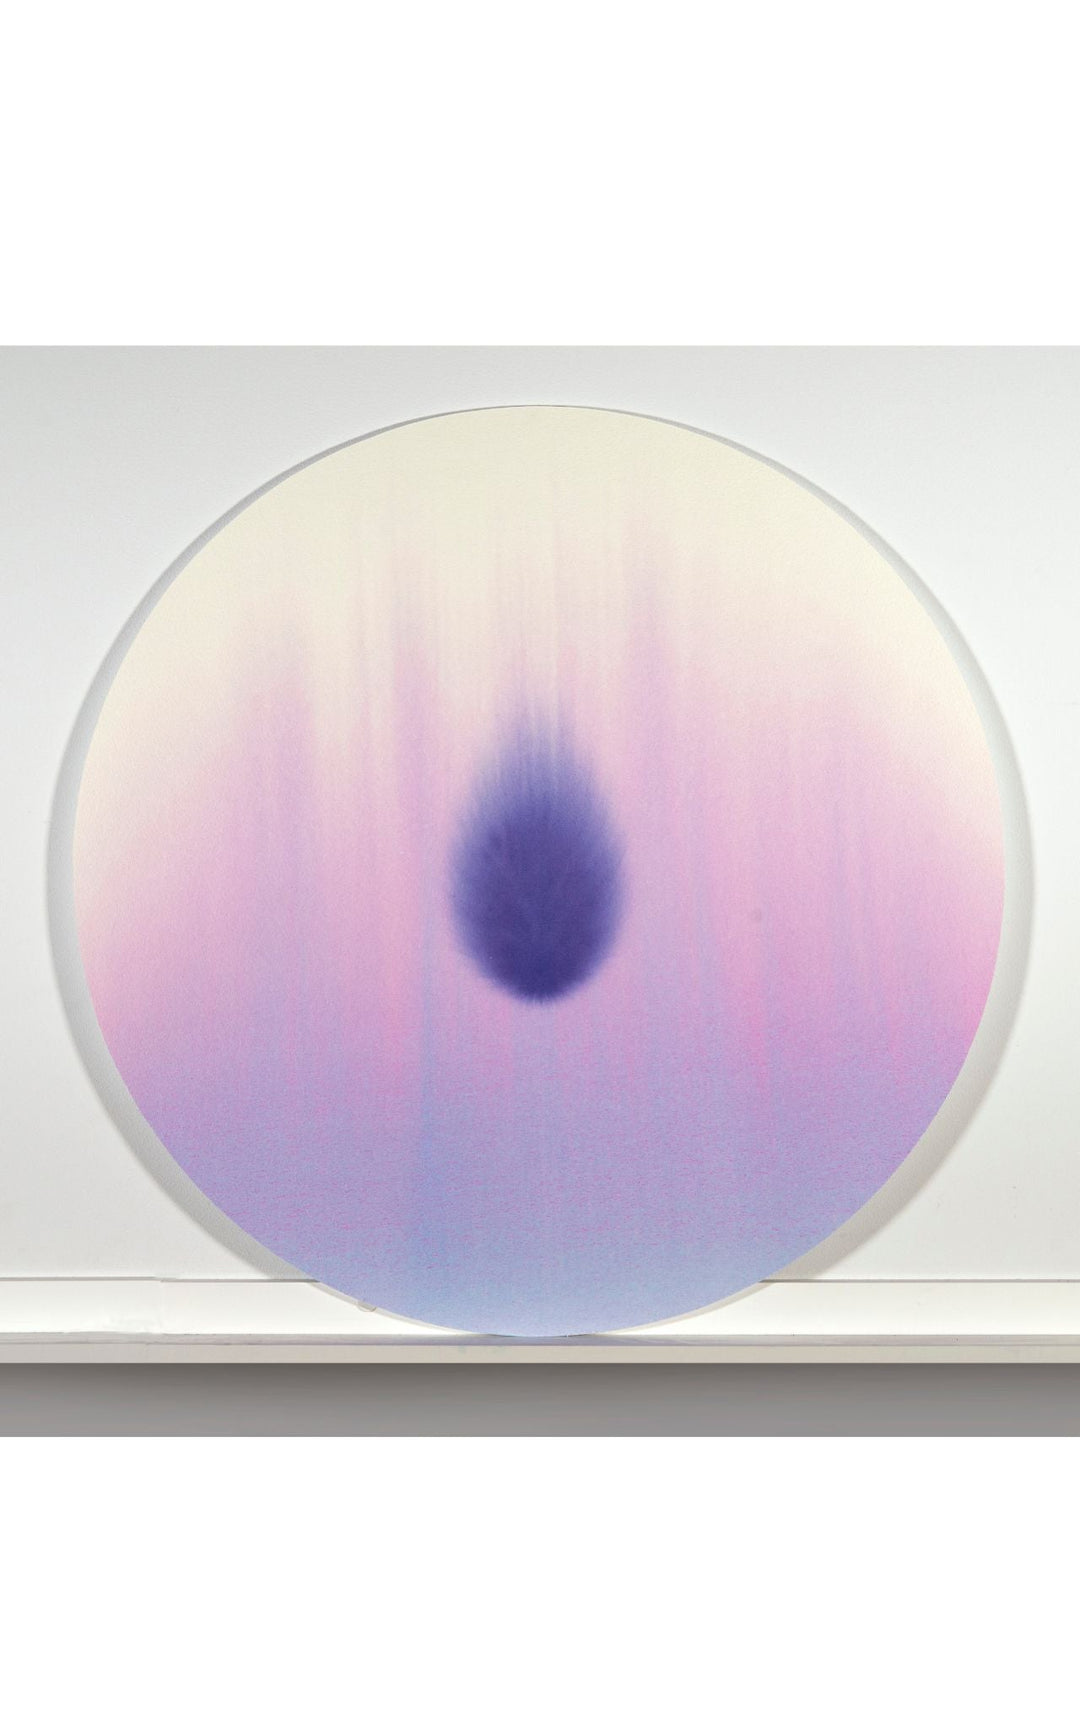 Minimalist tondo watercolor with intense purple central shape, set against a background of diluted hues.